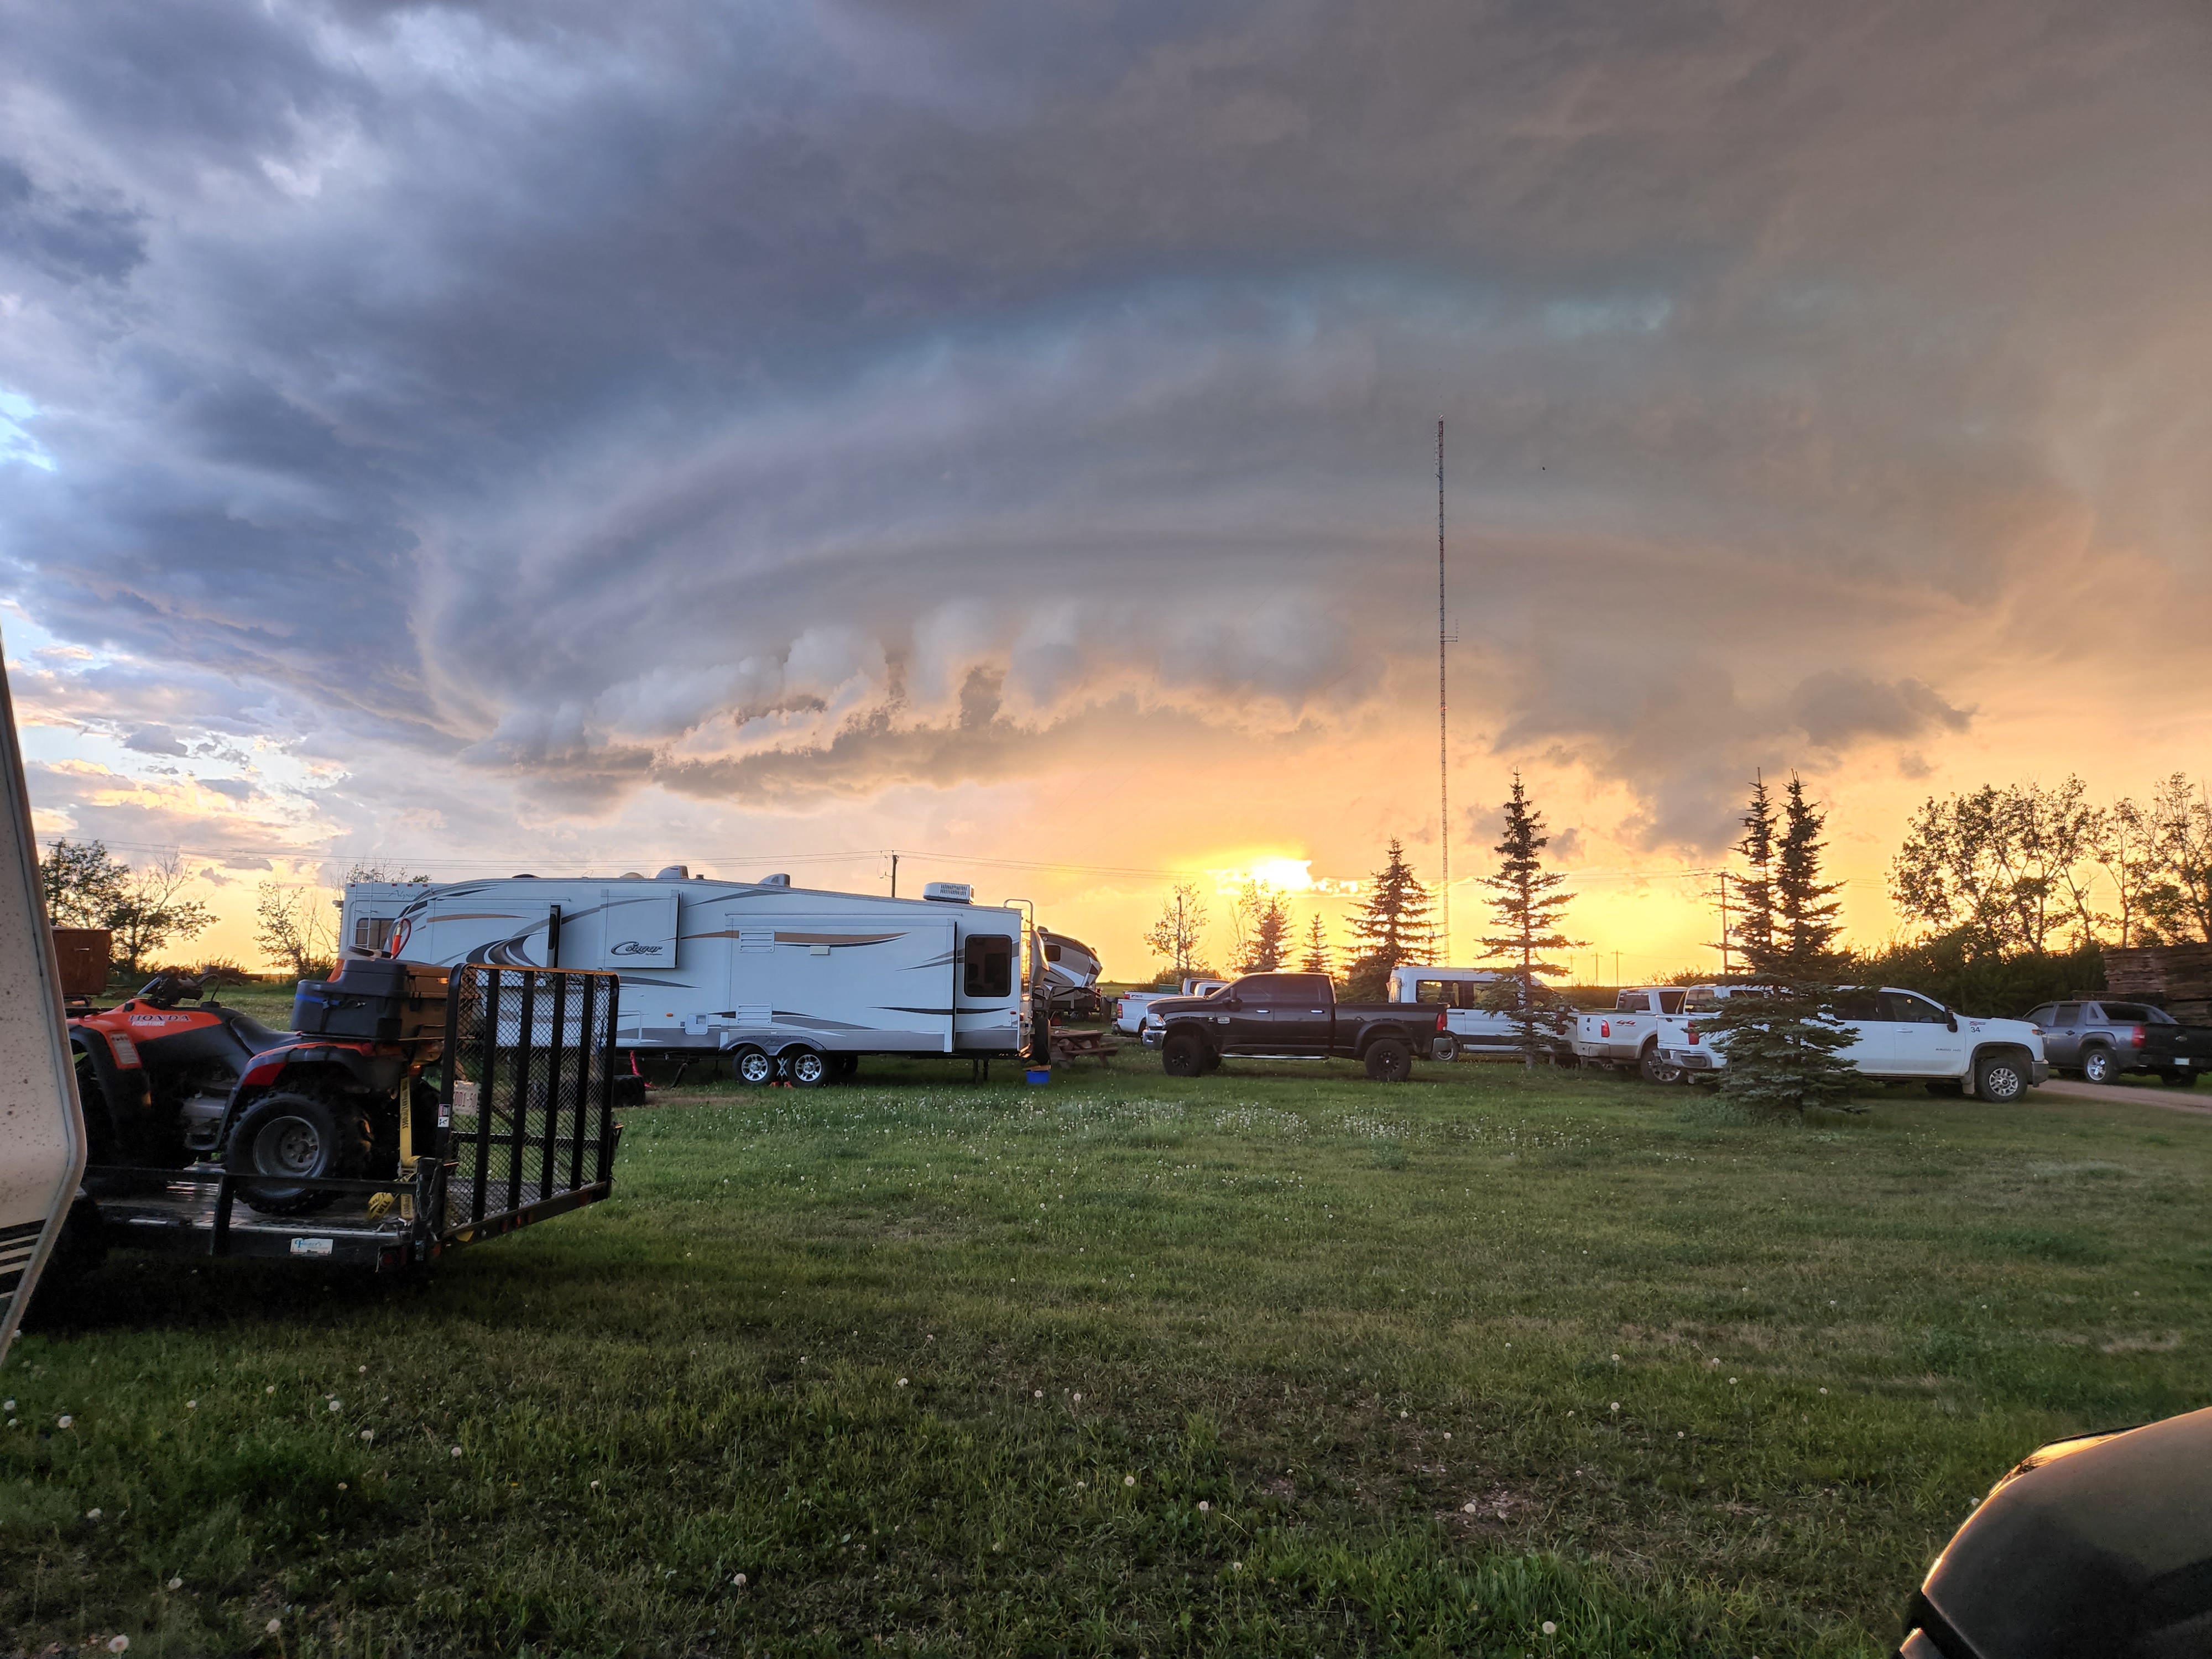 Weather moving in over campsite near Youngstown, Alberta